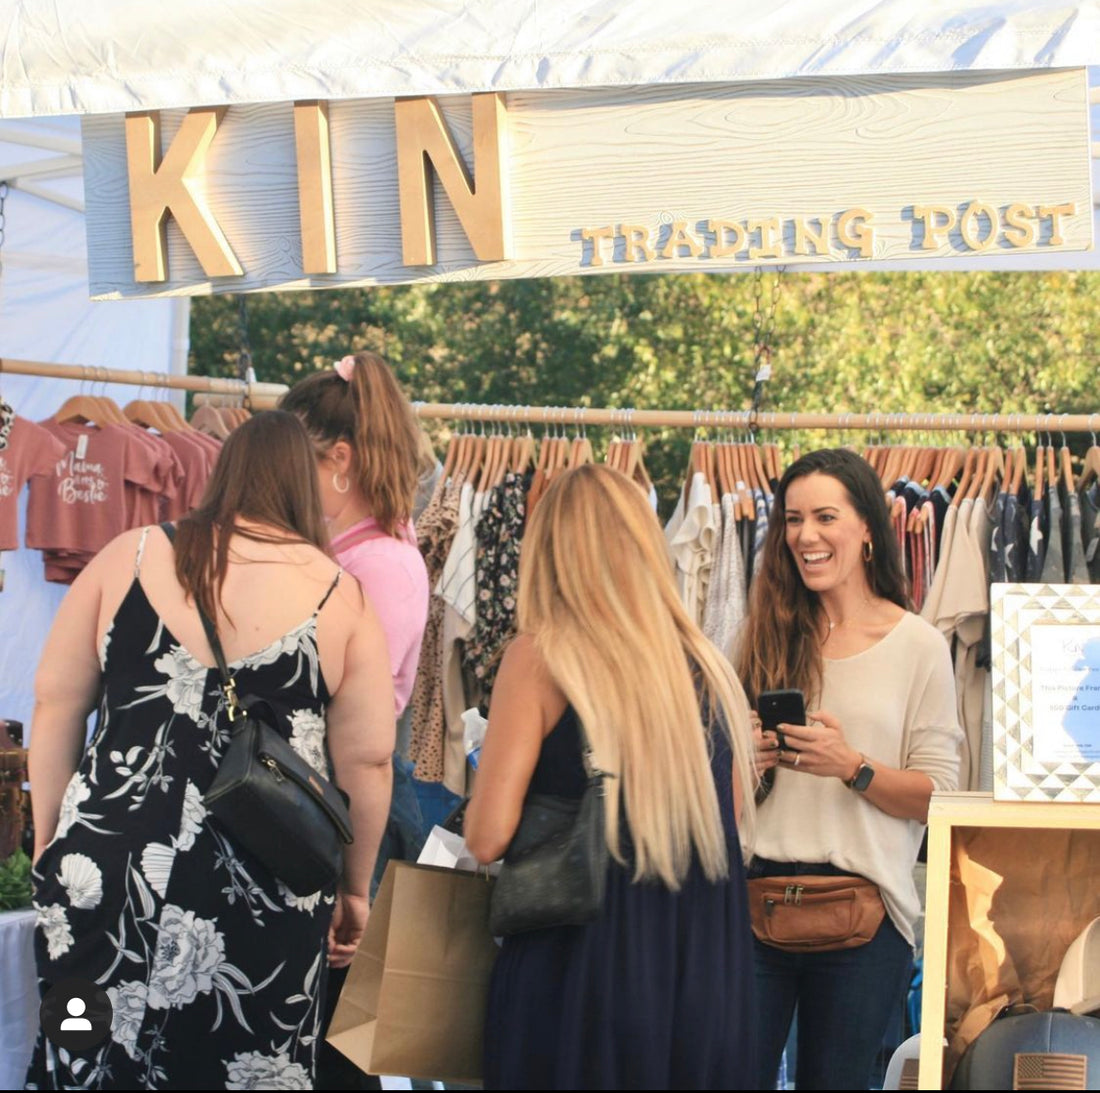 Shop with us at a Local Pop Up or Market Event - Kin Trading Post